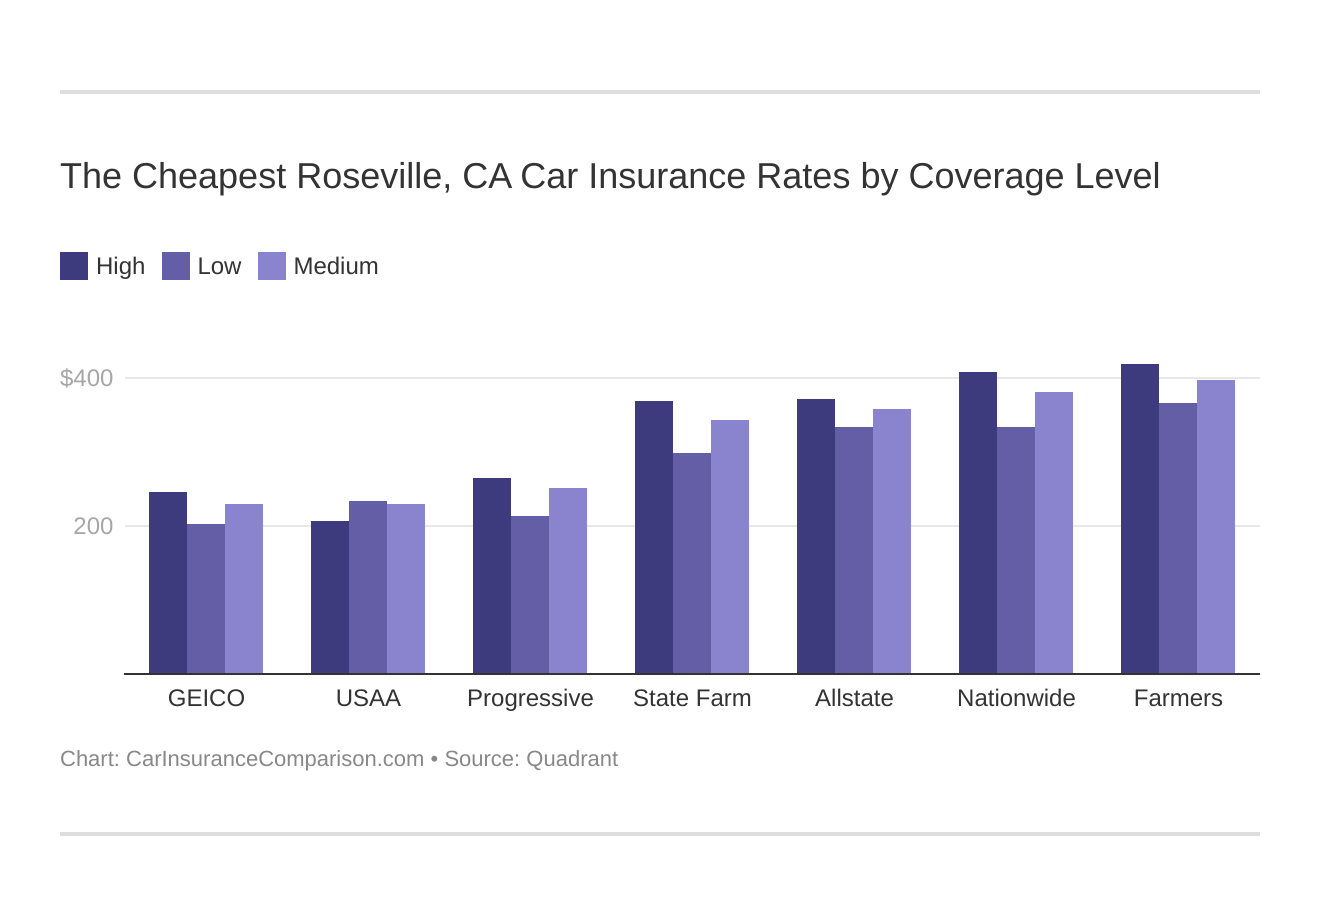 The Cheapest Roseville, CA Car Insurance Rates by Coverage Level